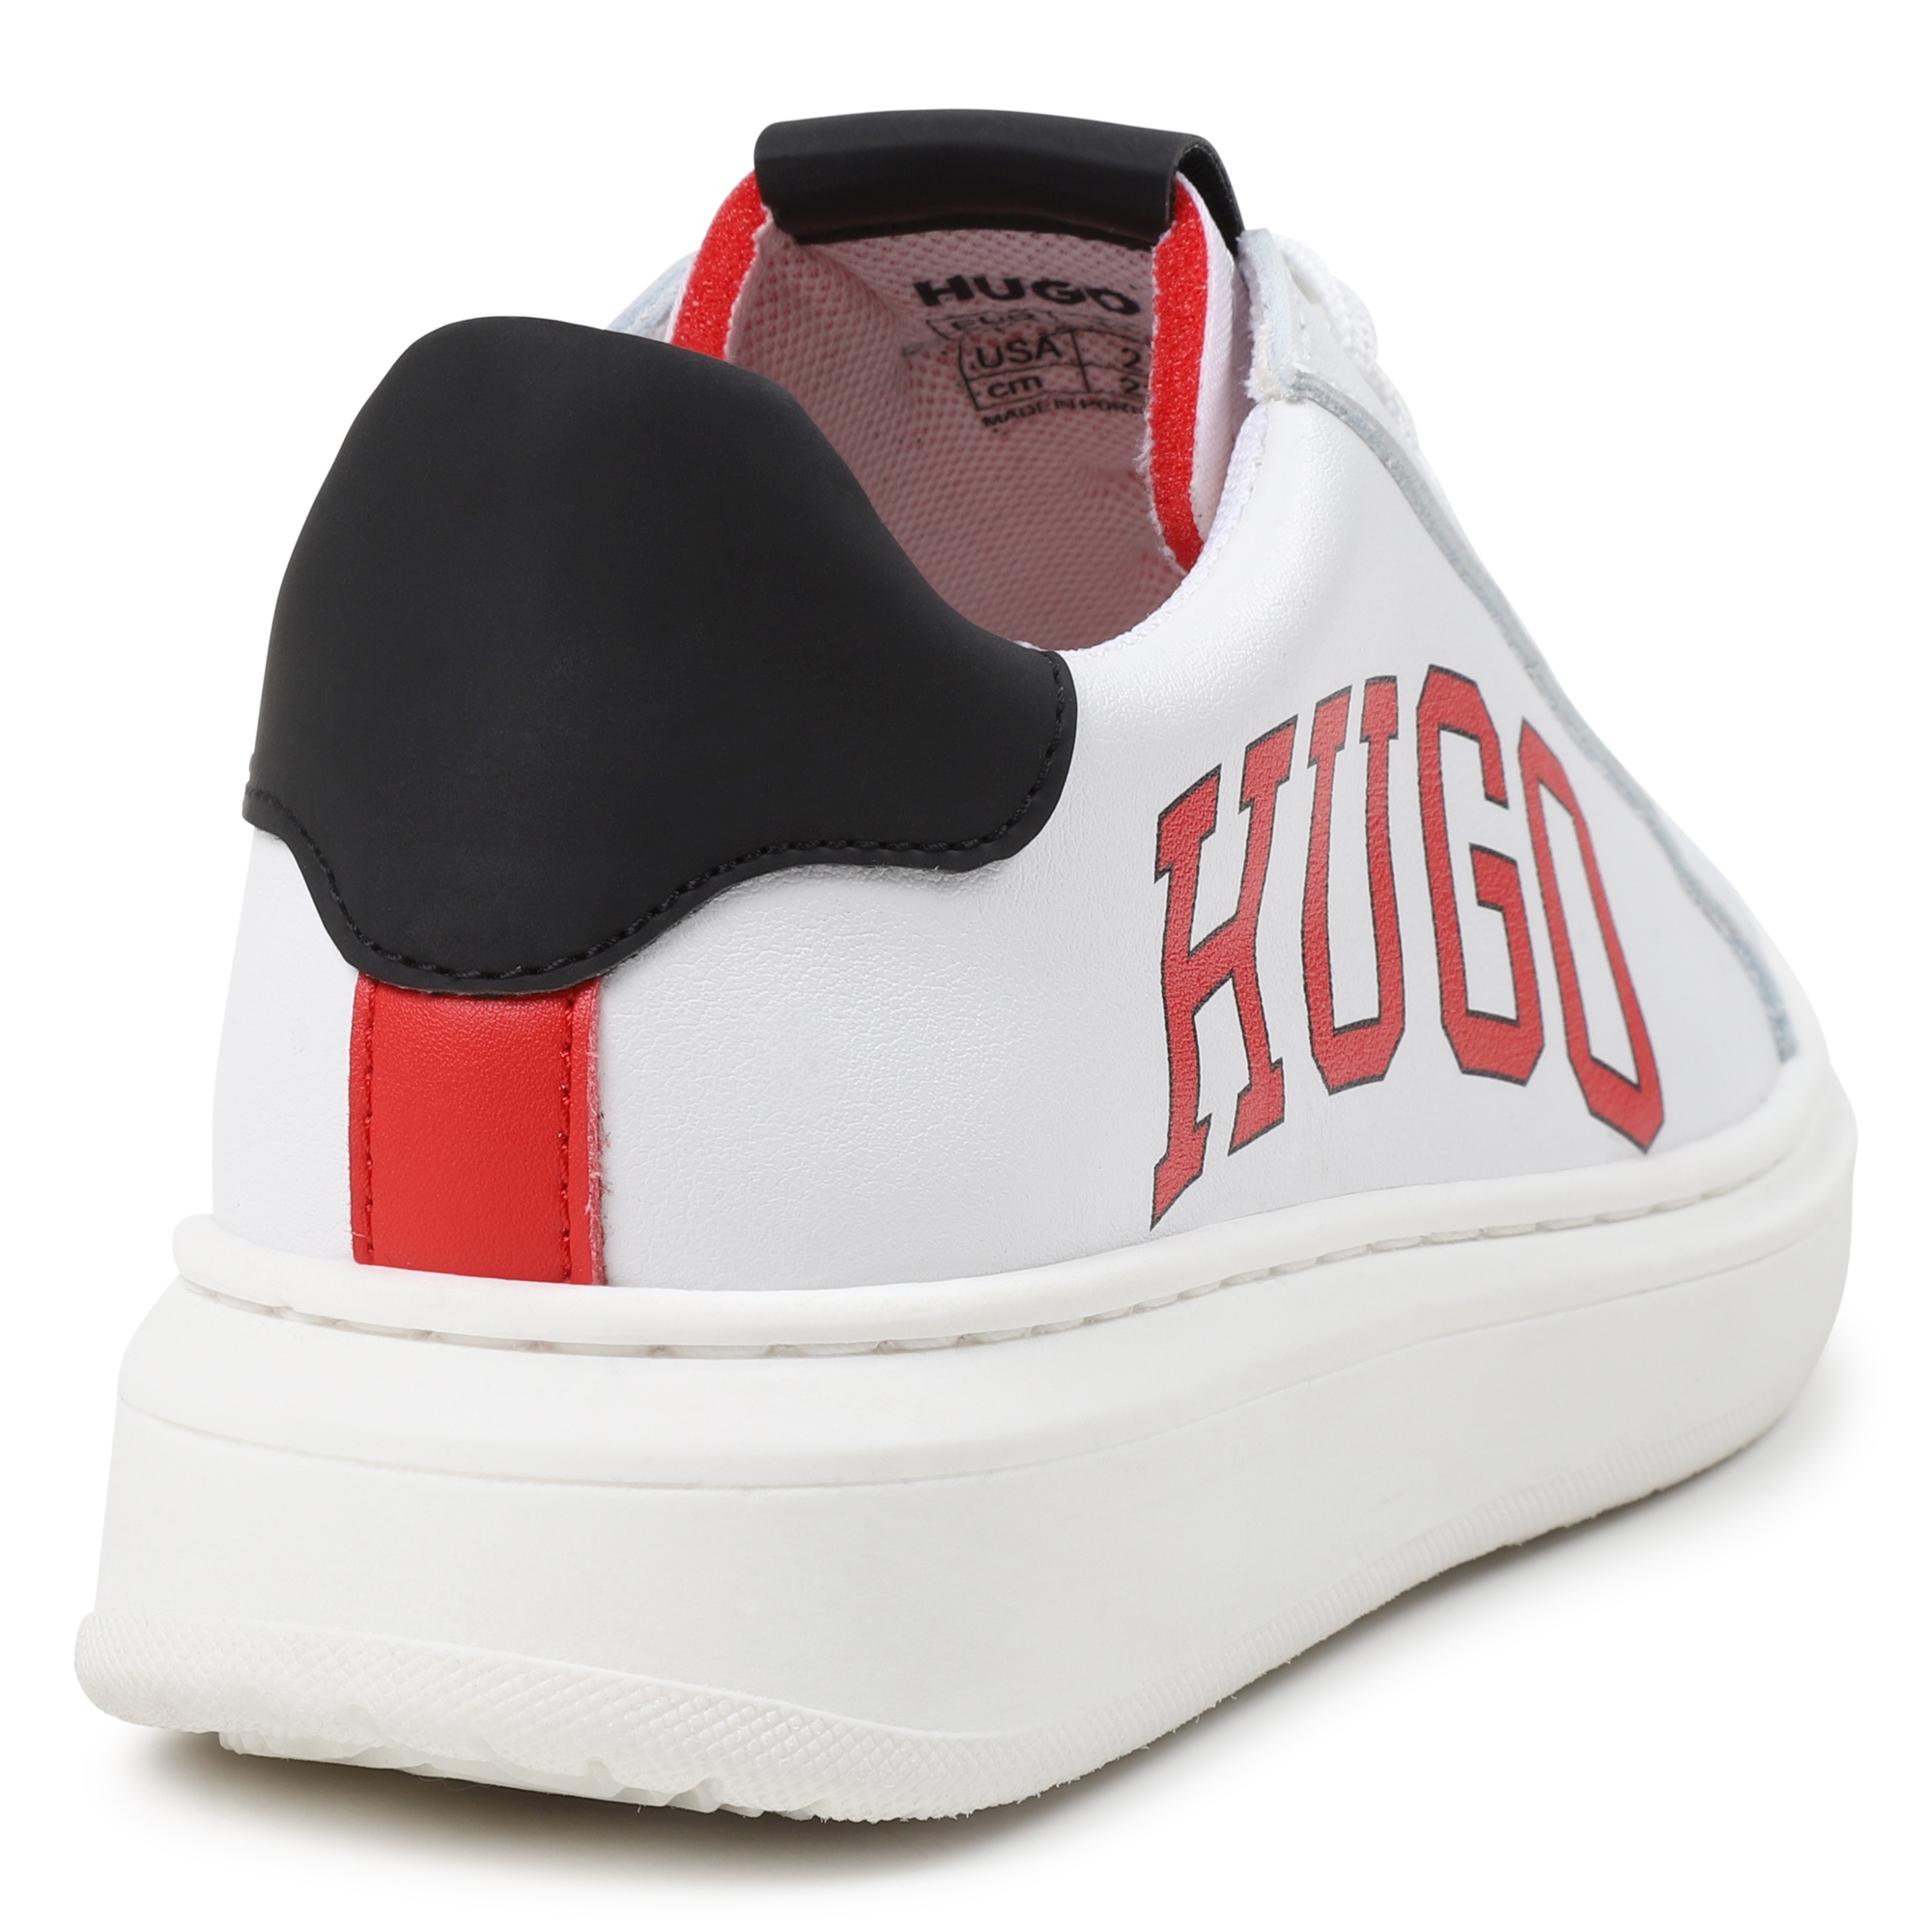 Printed trainers HUGO for BOY